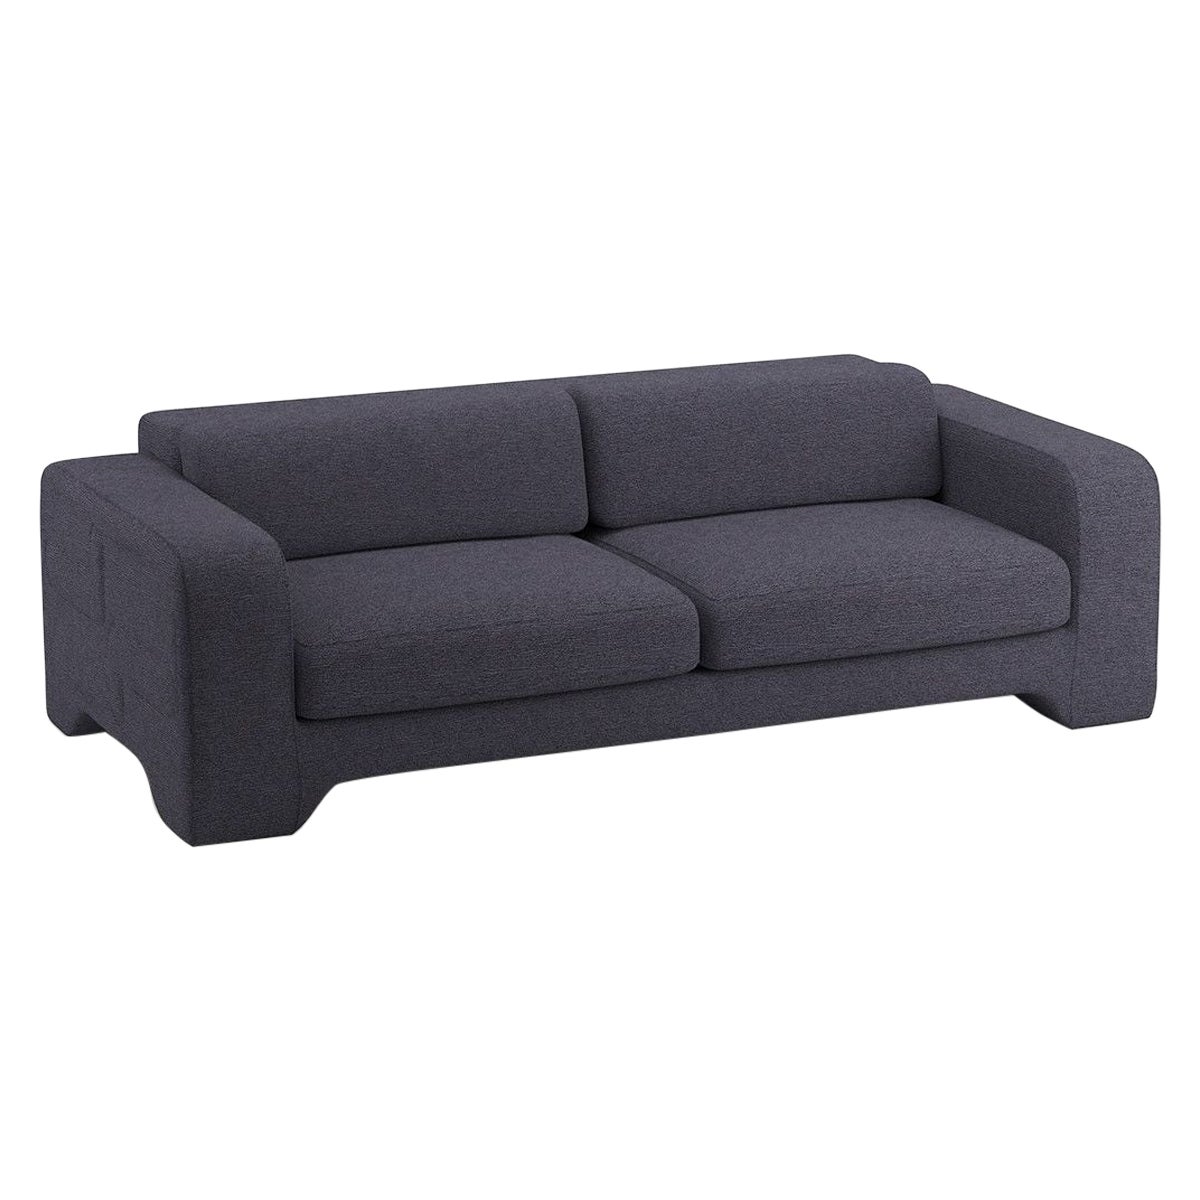 Popus Editions Giovanna 3 Seater Sofa in Anthracite Megeve Fabric Knit Effect